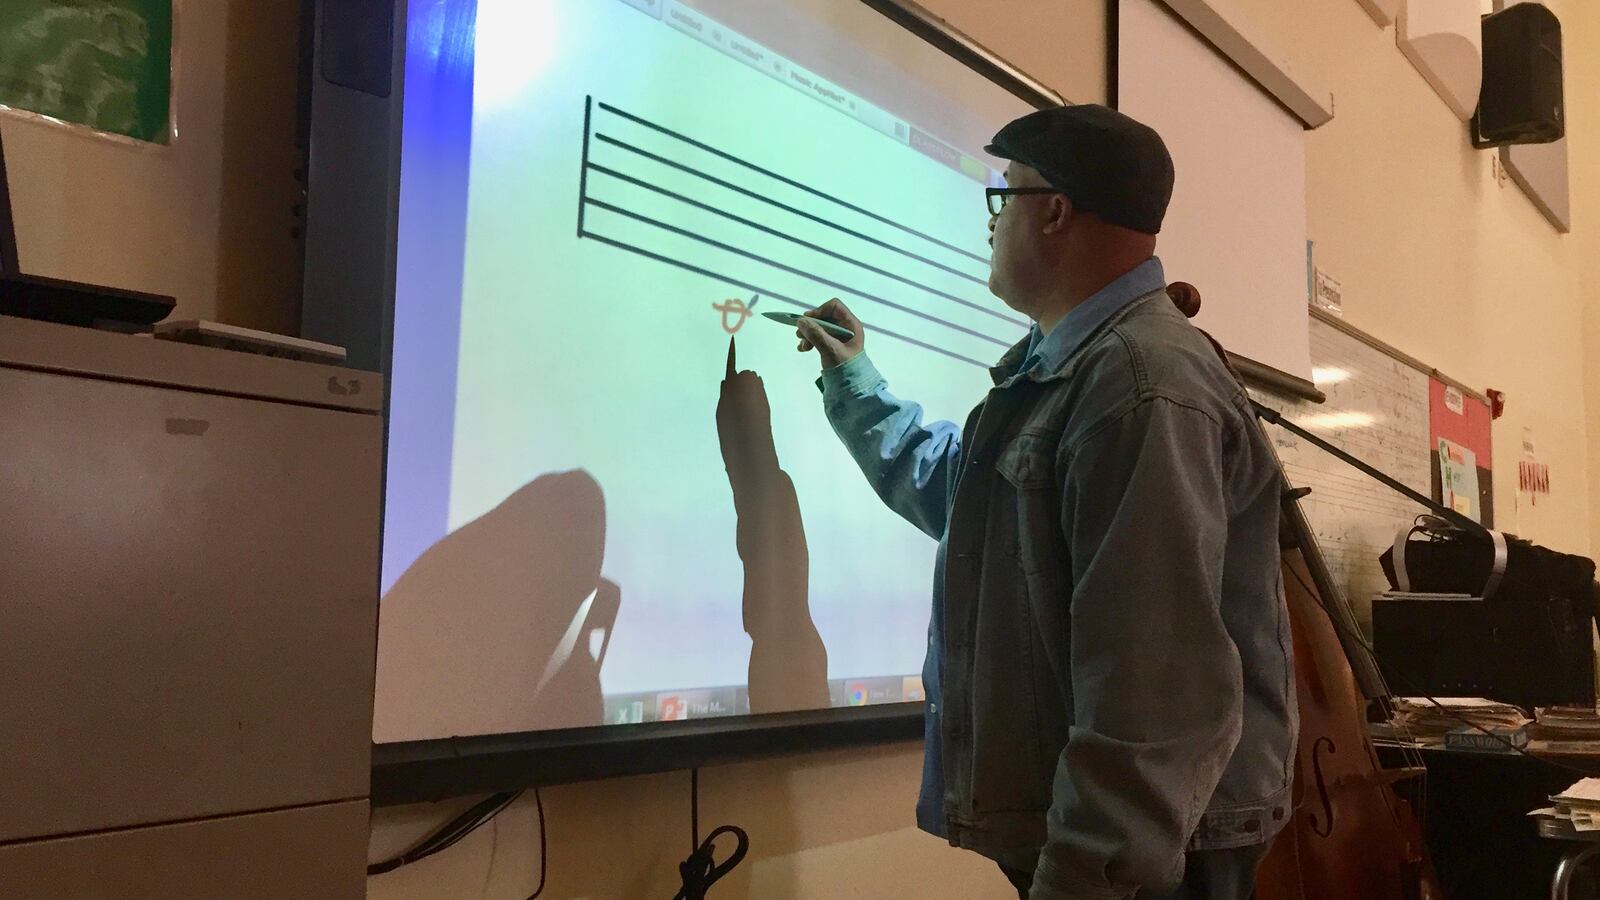 Music teacher Quincy Stewart incorporates math, writing and history in his music classes at Detroit’s Central High School